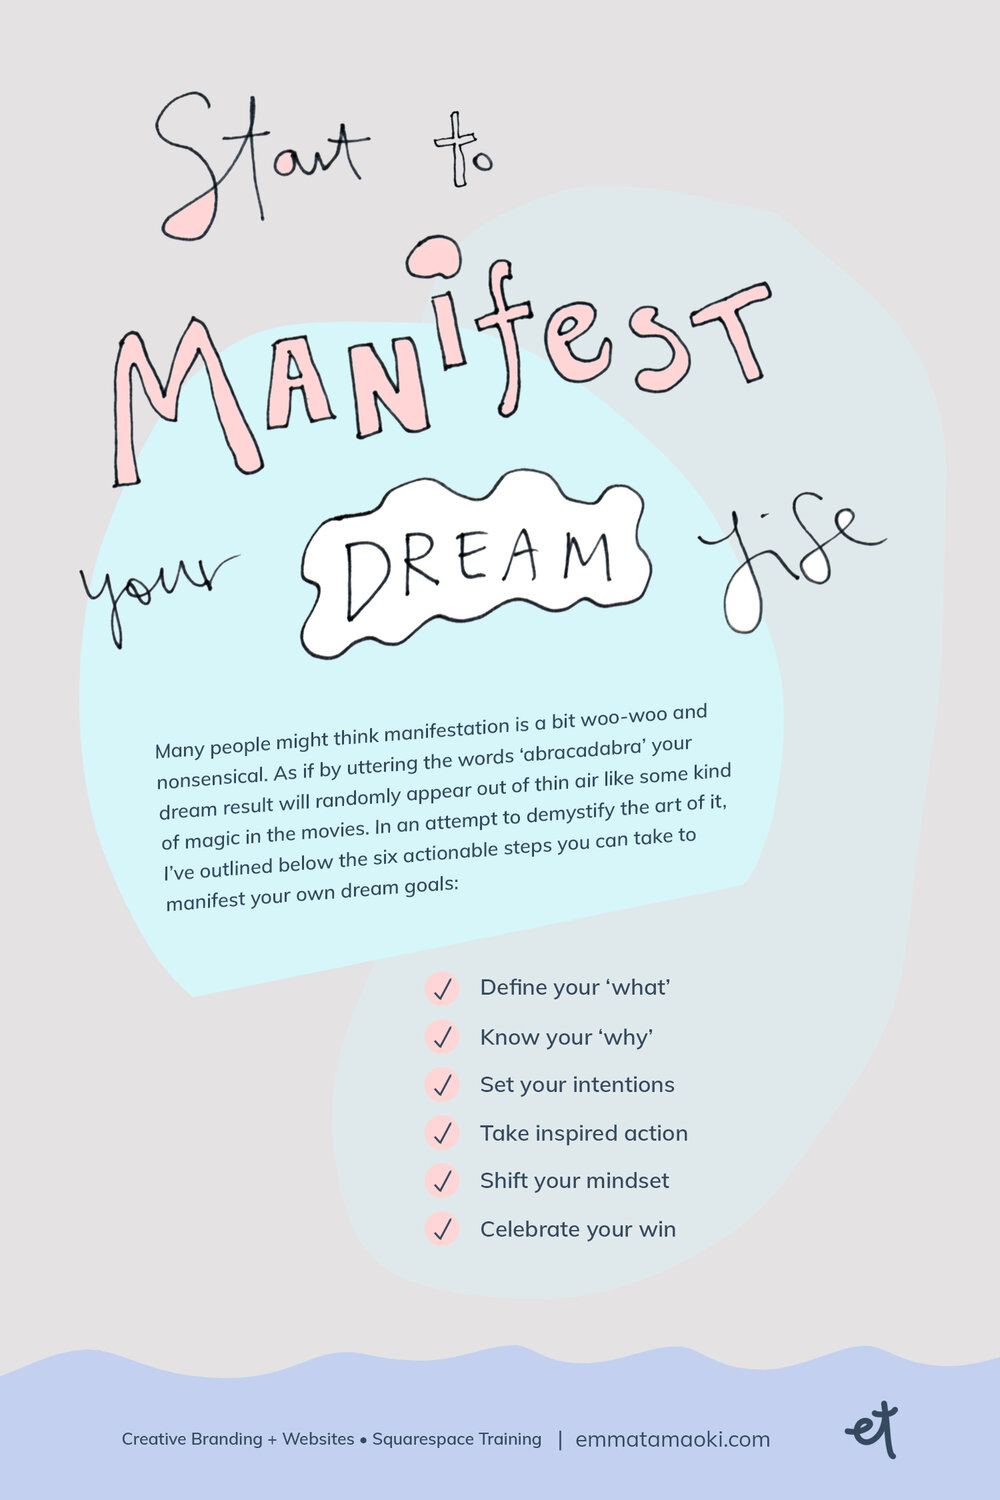 How To Start Manifesting Your Goals?